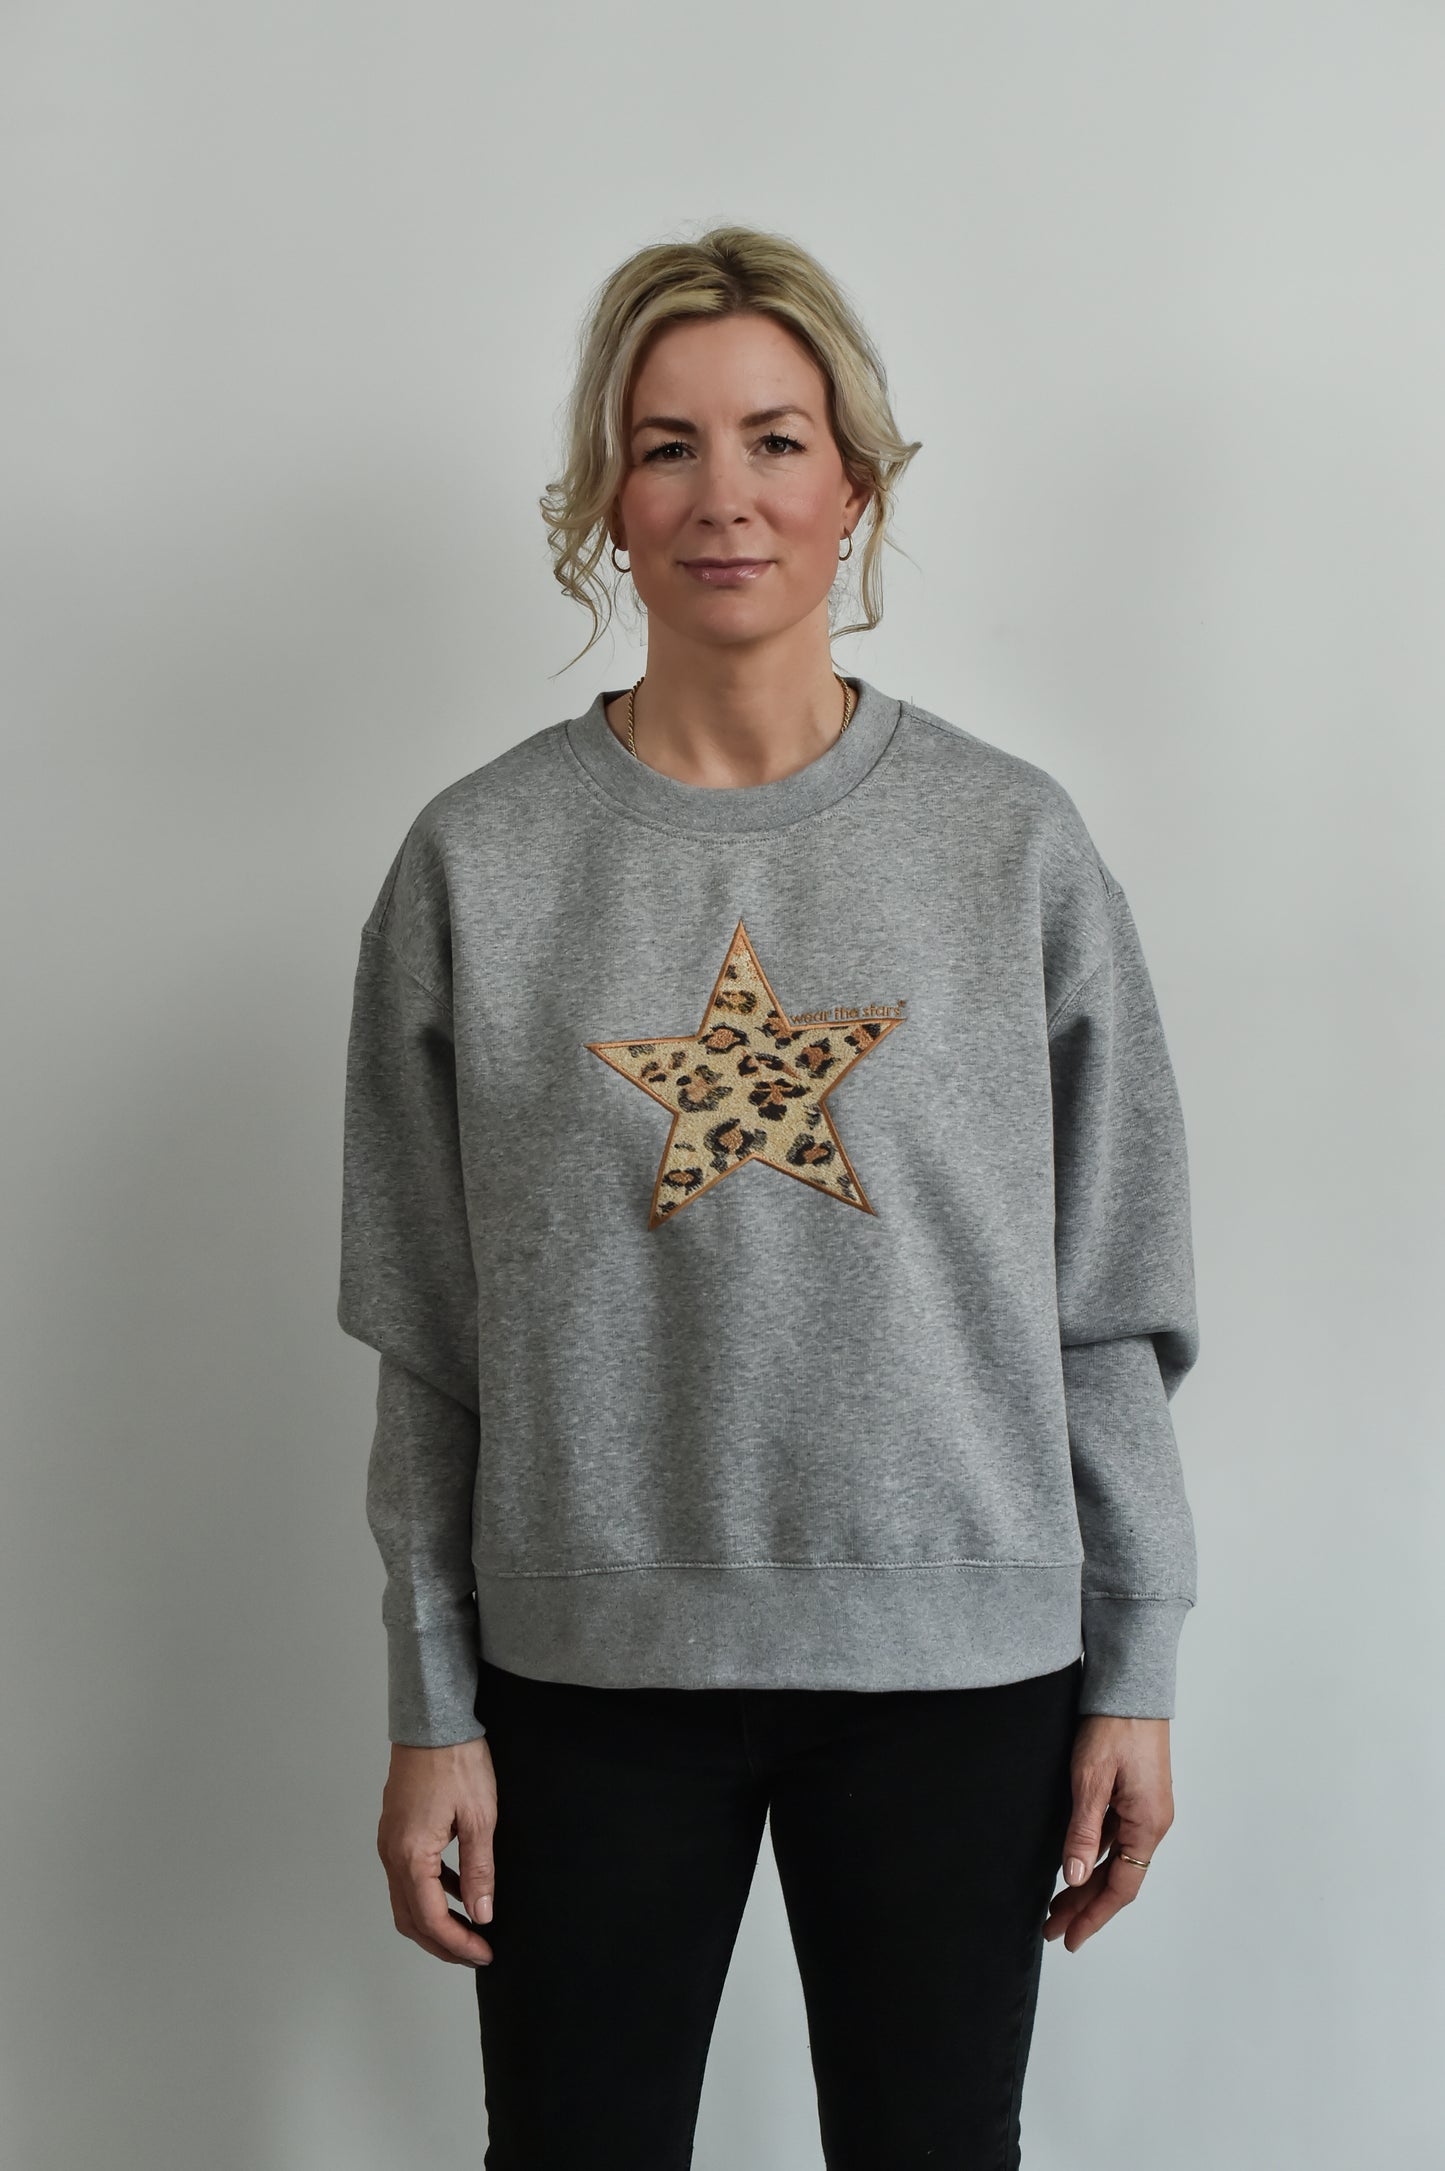 Grey sweatshirt with leopard embroidered star